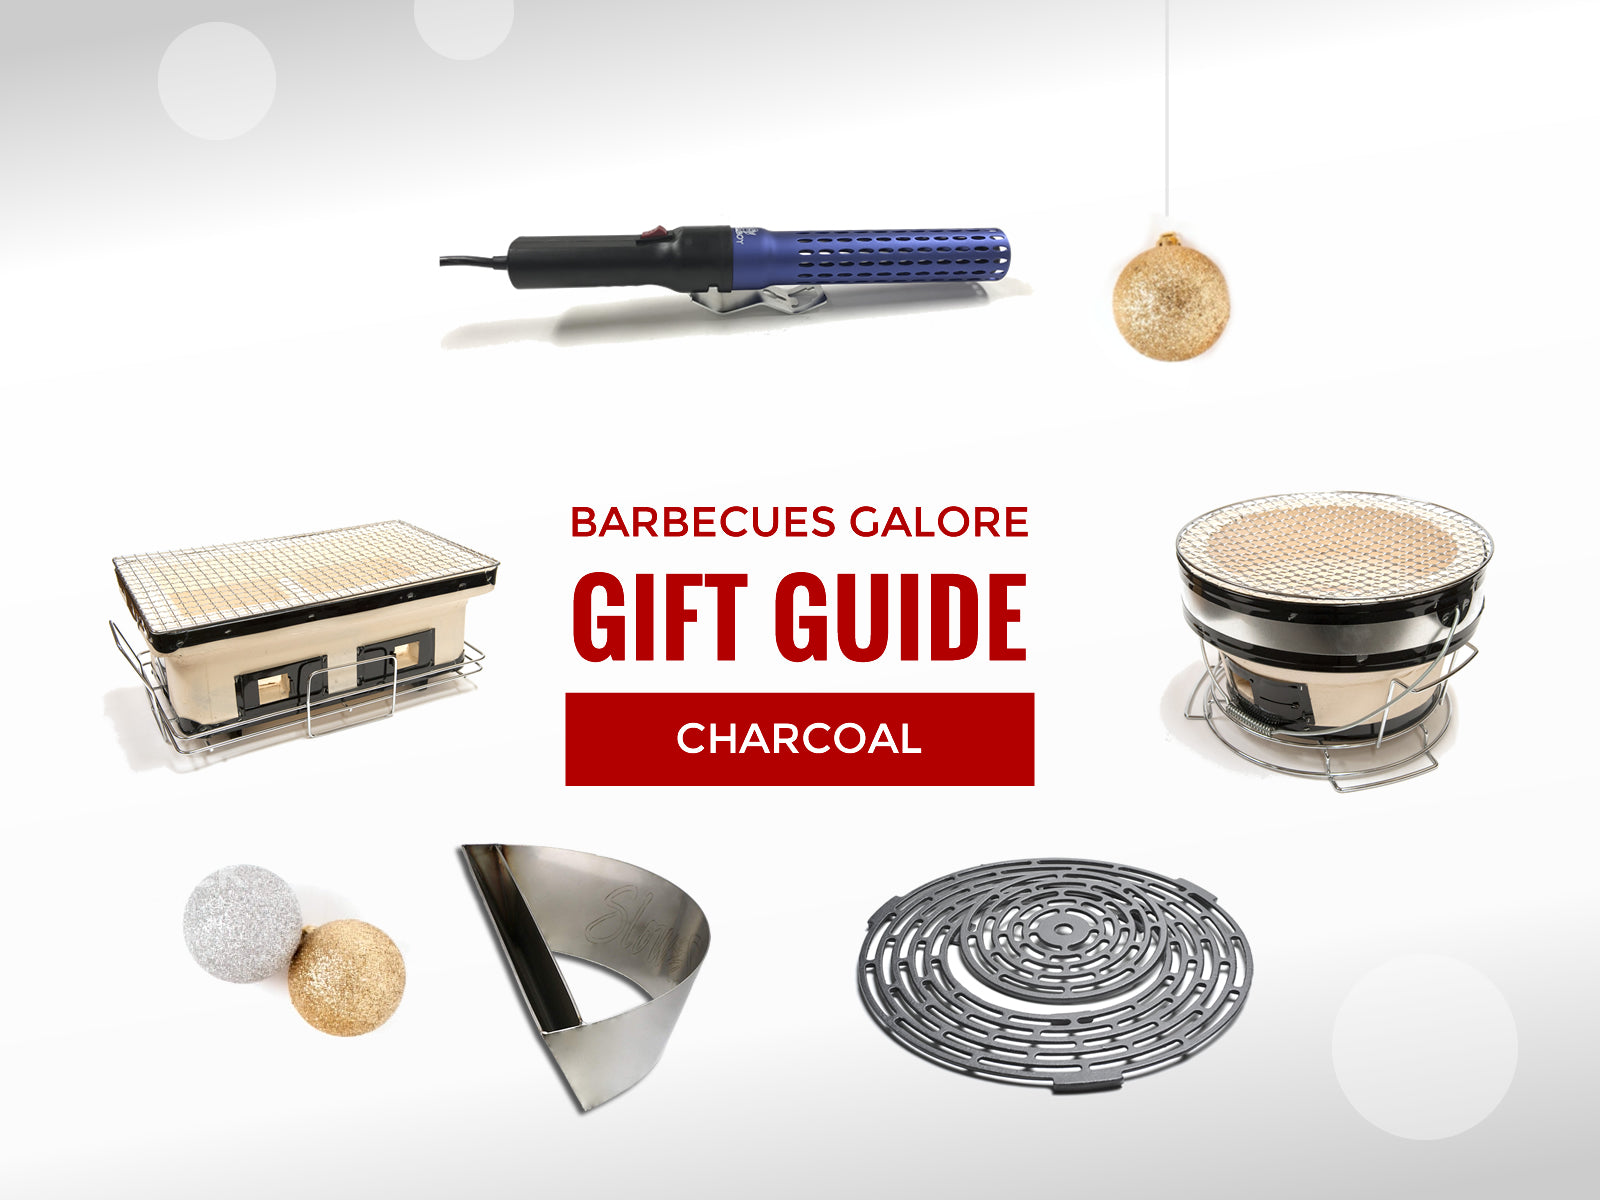 Gifts for Charcoal Grillers - Blowlighter, Heat Resistant Gloves, Plate Setter, Dual-Channel Thermometer, Charcoal Lighter